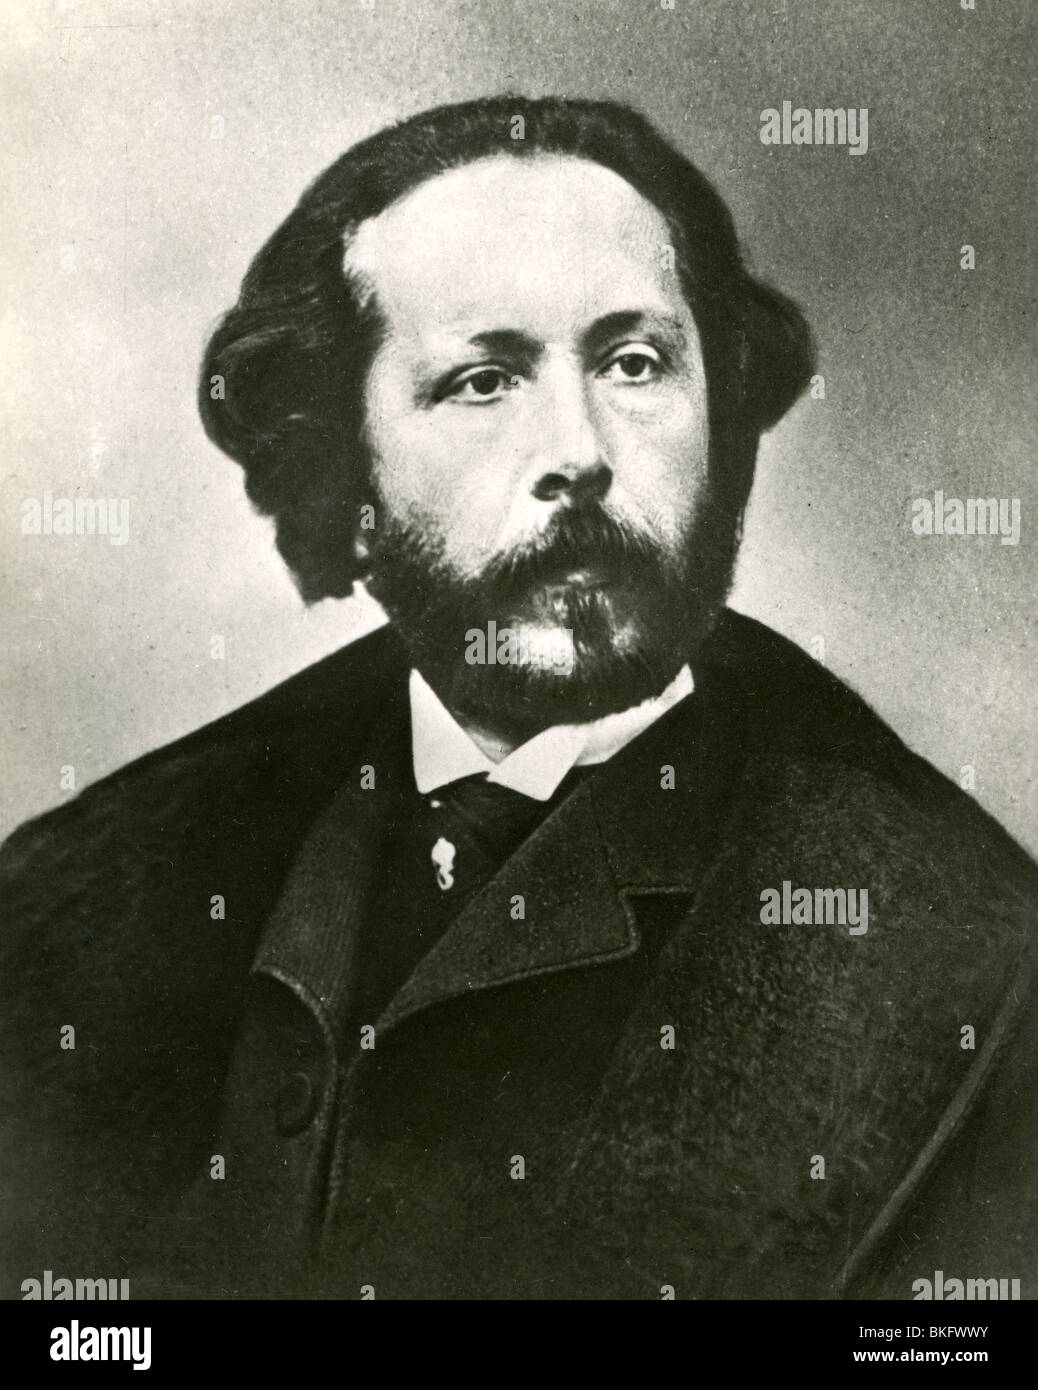 EDOUARD-VICTOIRE-ANTOINE LALO - French composer (1823-1892) Stock Photo